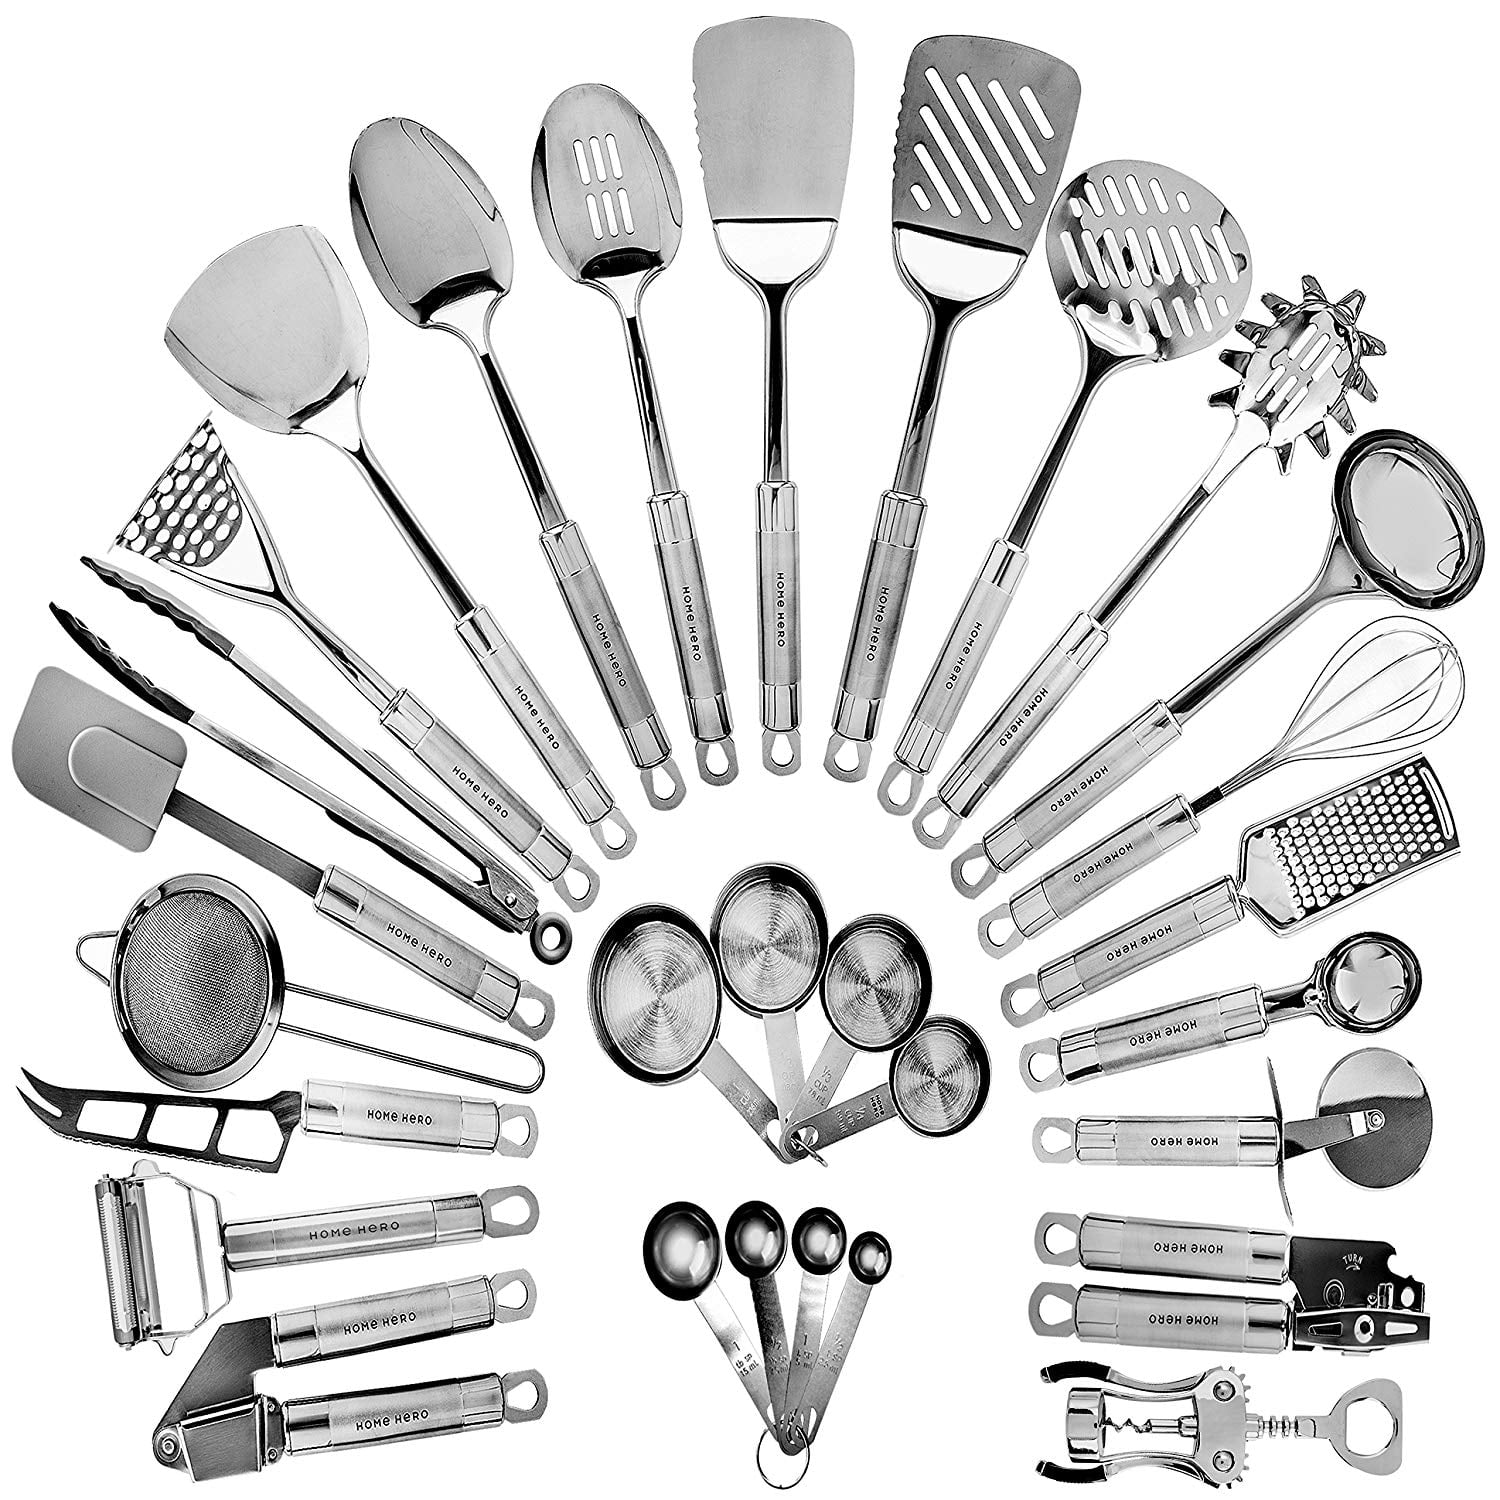 1790 Stainless Steel Kitchen Utensil Set 25 Cooking Utensils Ideal for College Students Tool Set Gift Nonstick Utensils Cookware Set with Spatula 